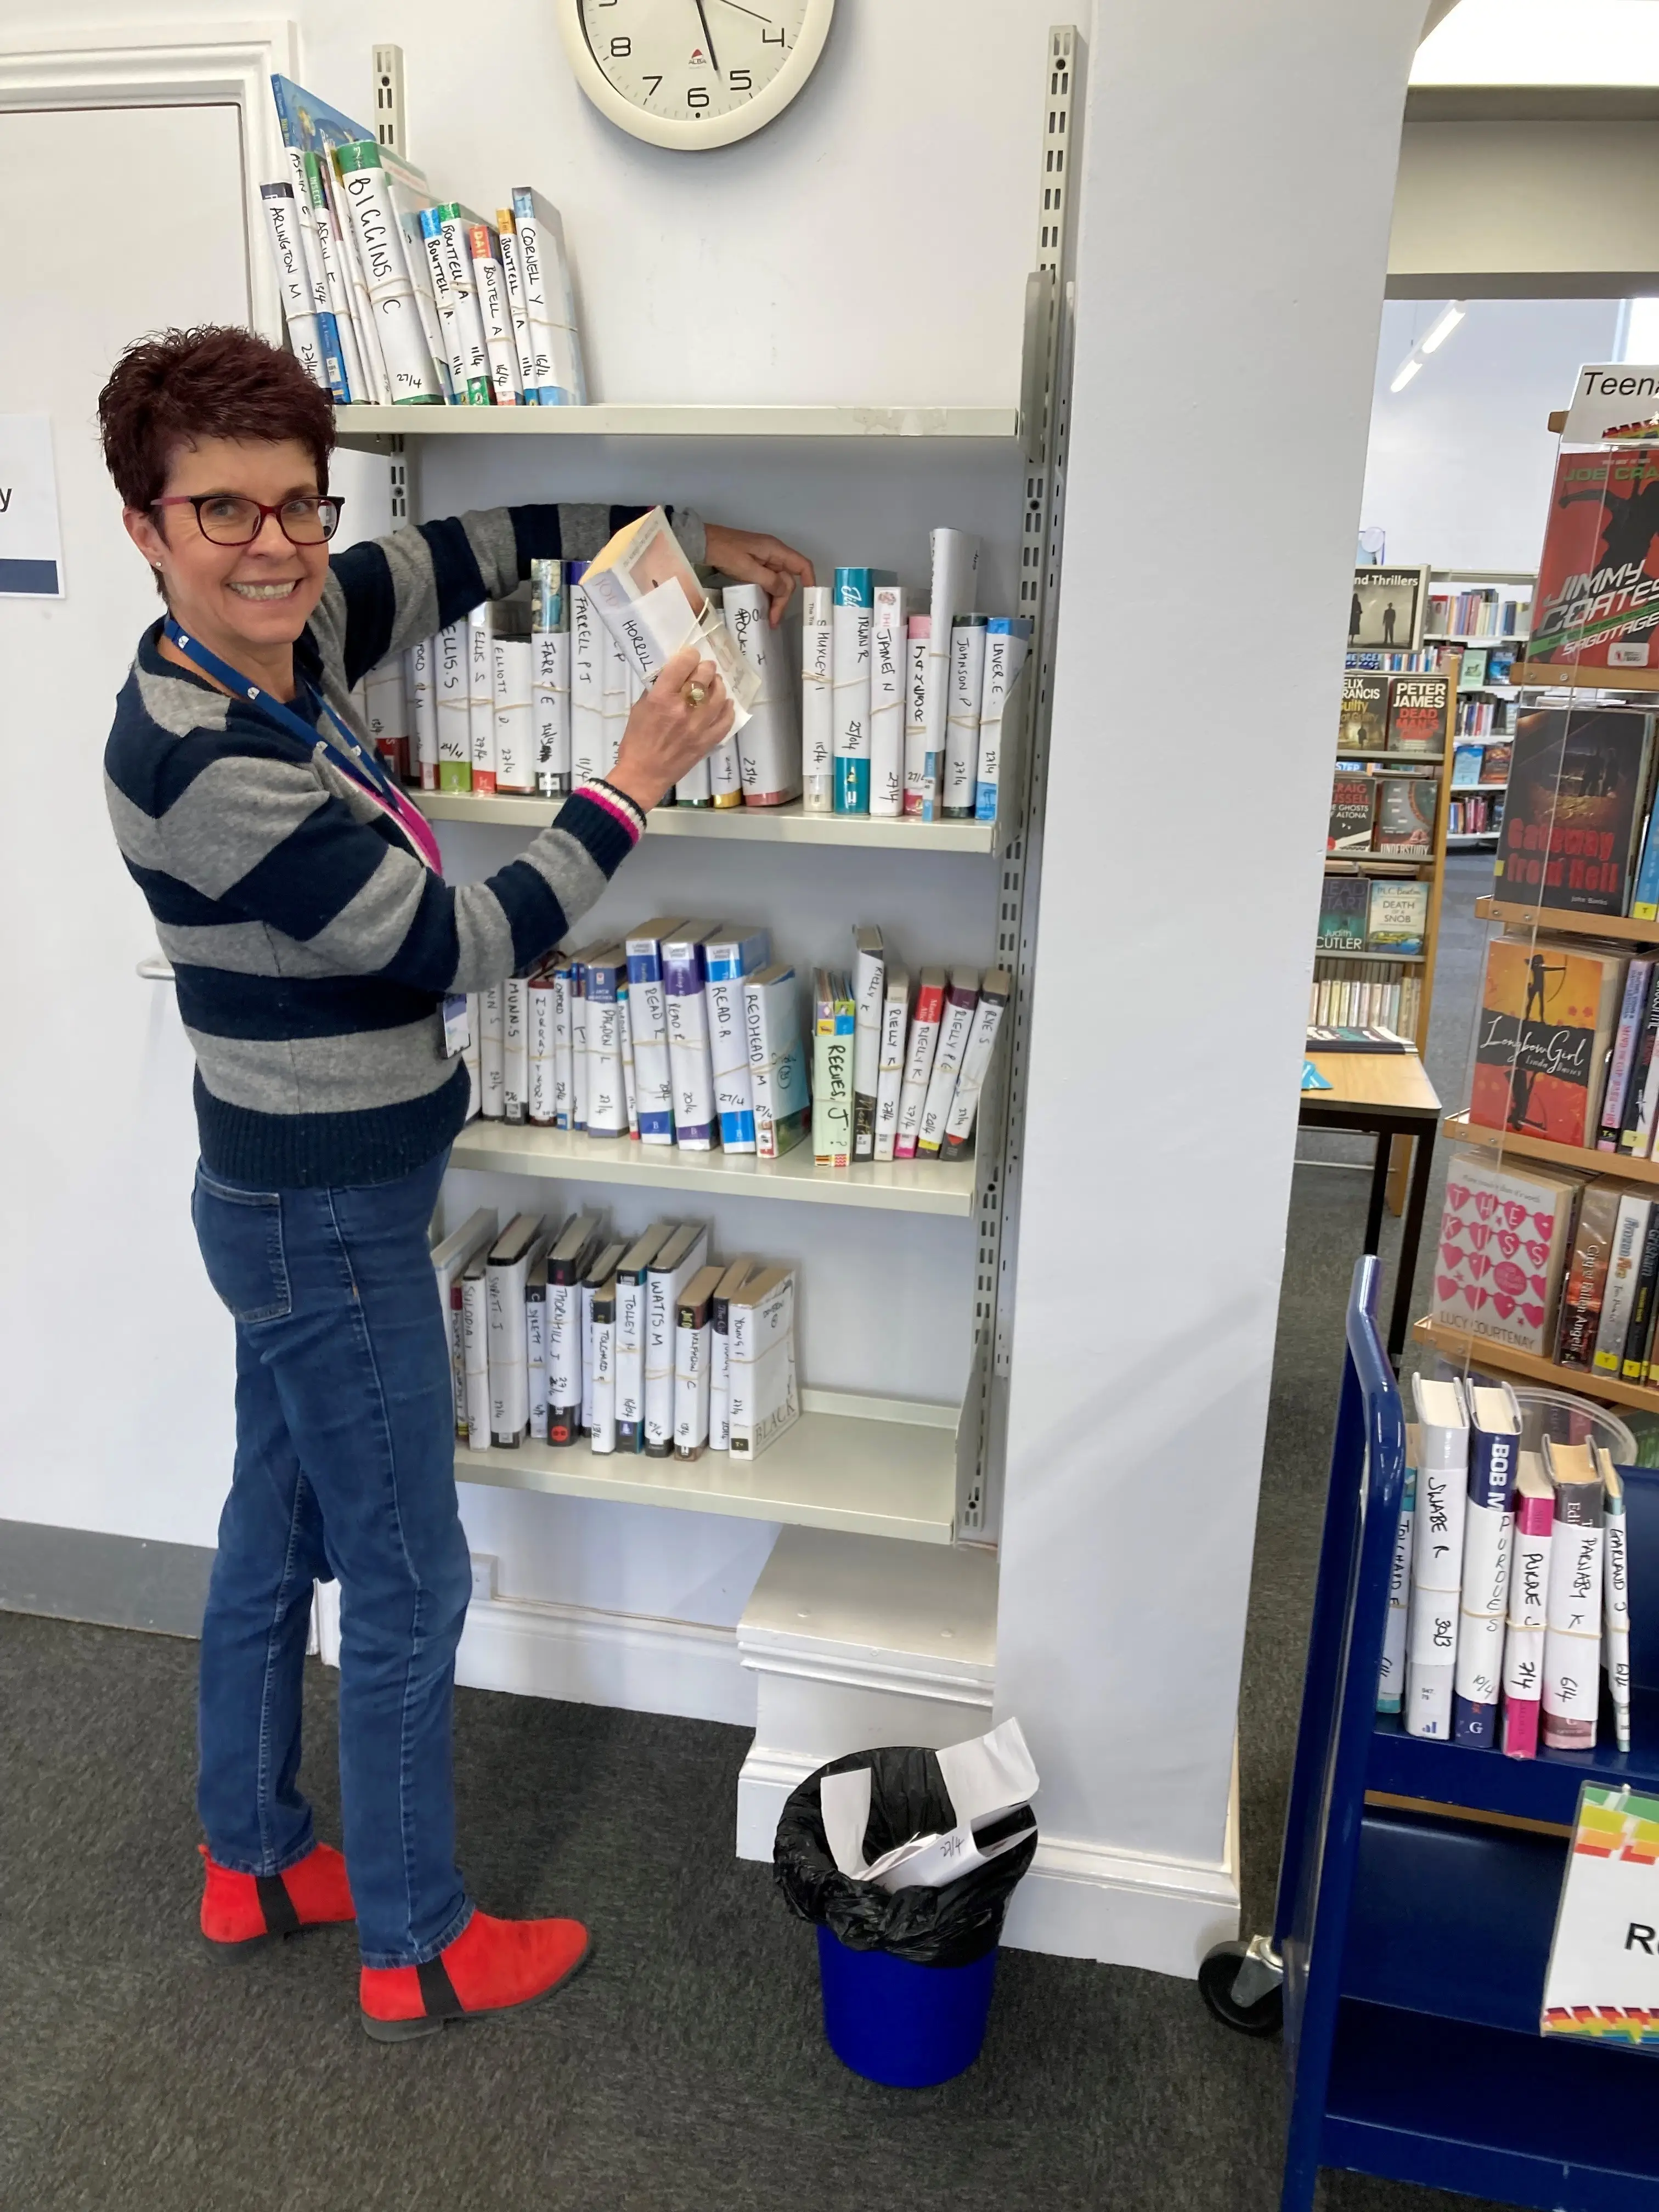 This is a picture of a library assistant putting a reserved book on the shelving unit.